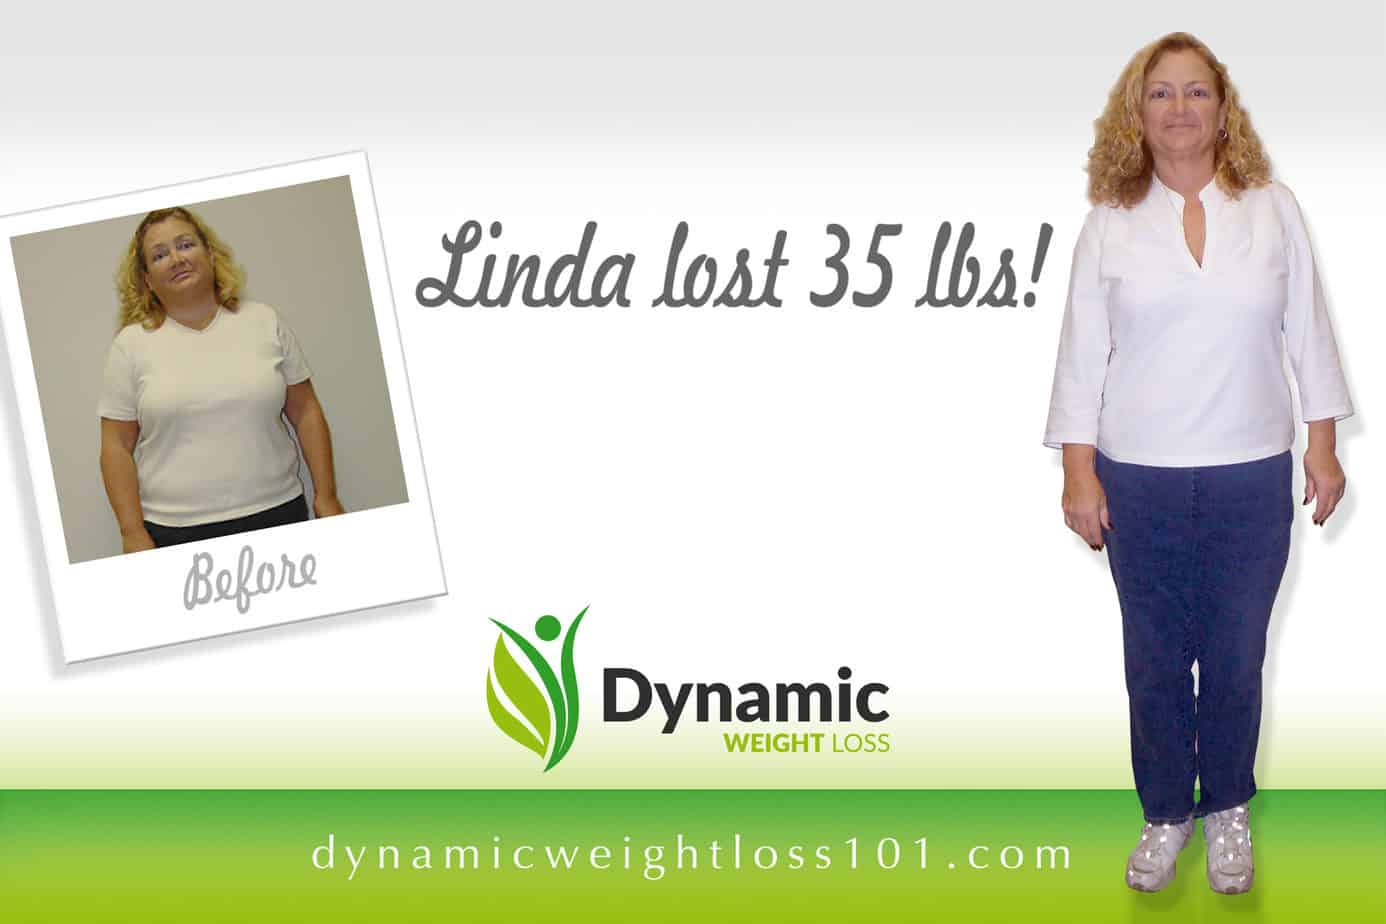 Dynamic weight loss